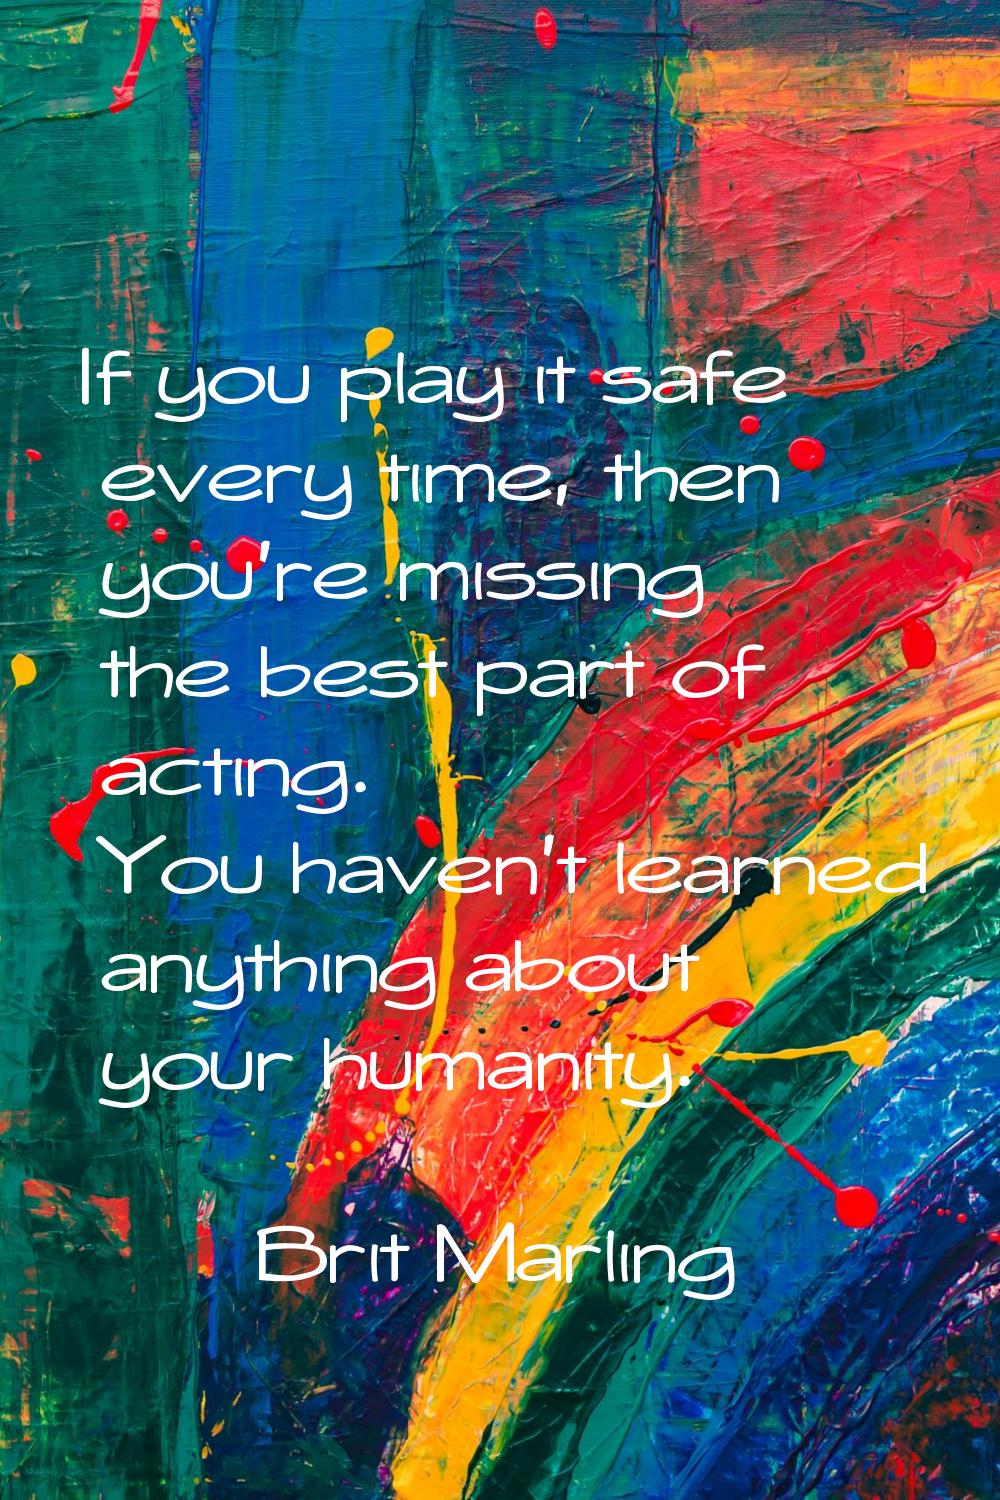 If you play it safe every time, then you're missing the best part of acting. You haven't learned an